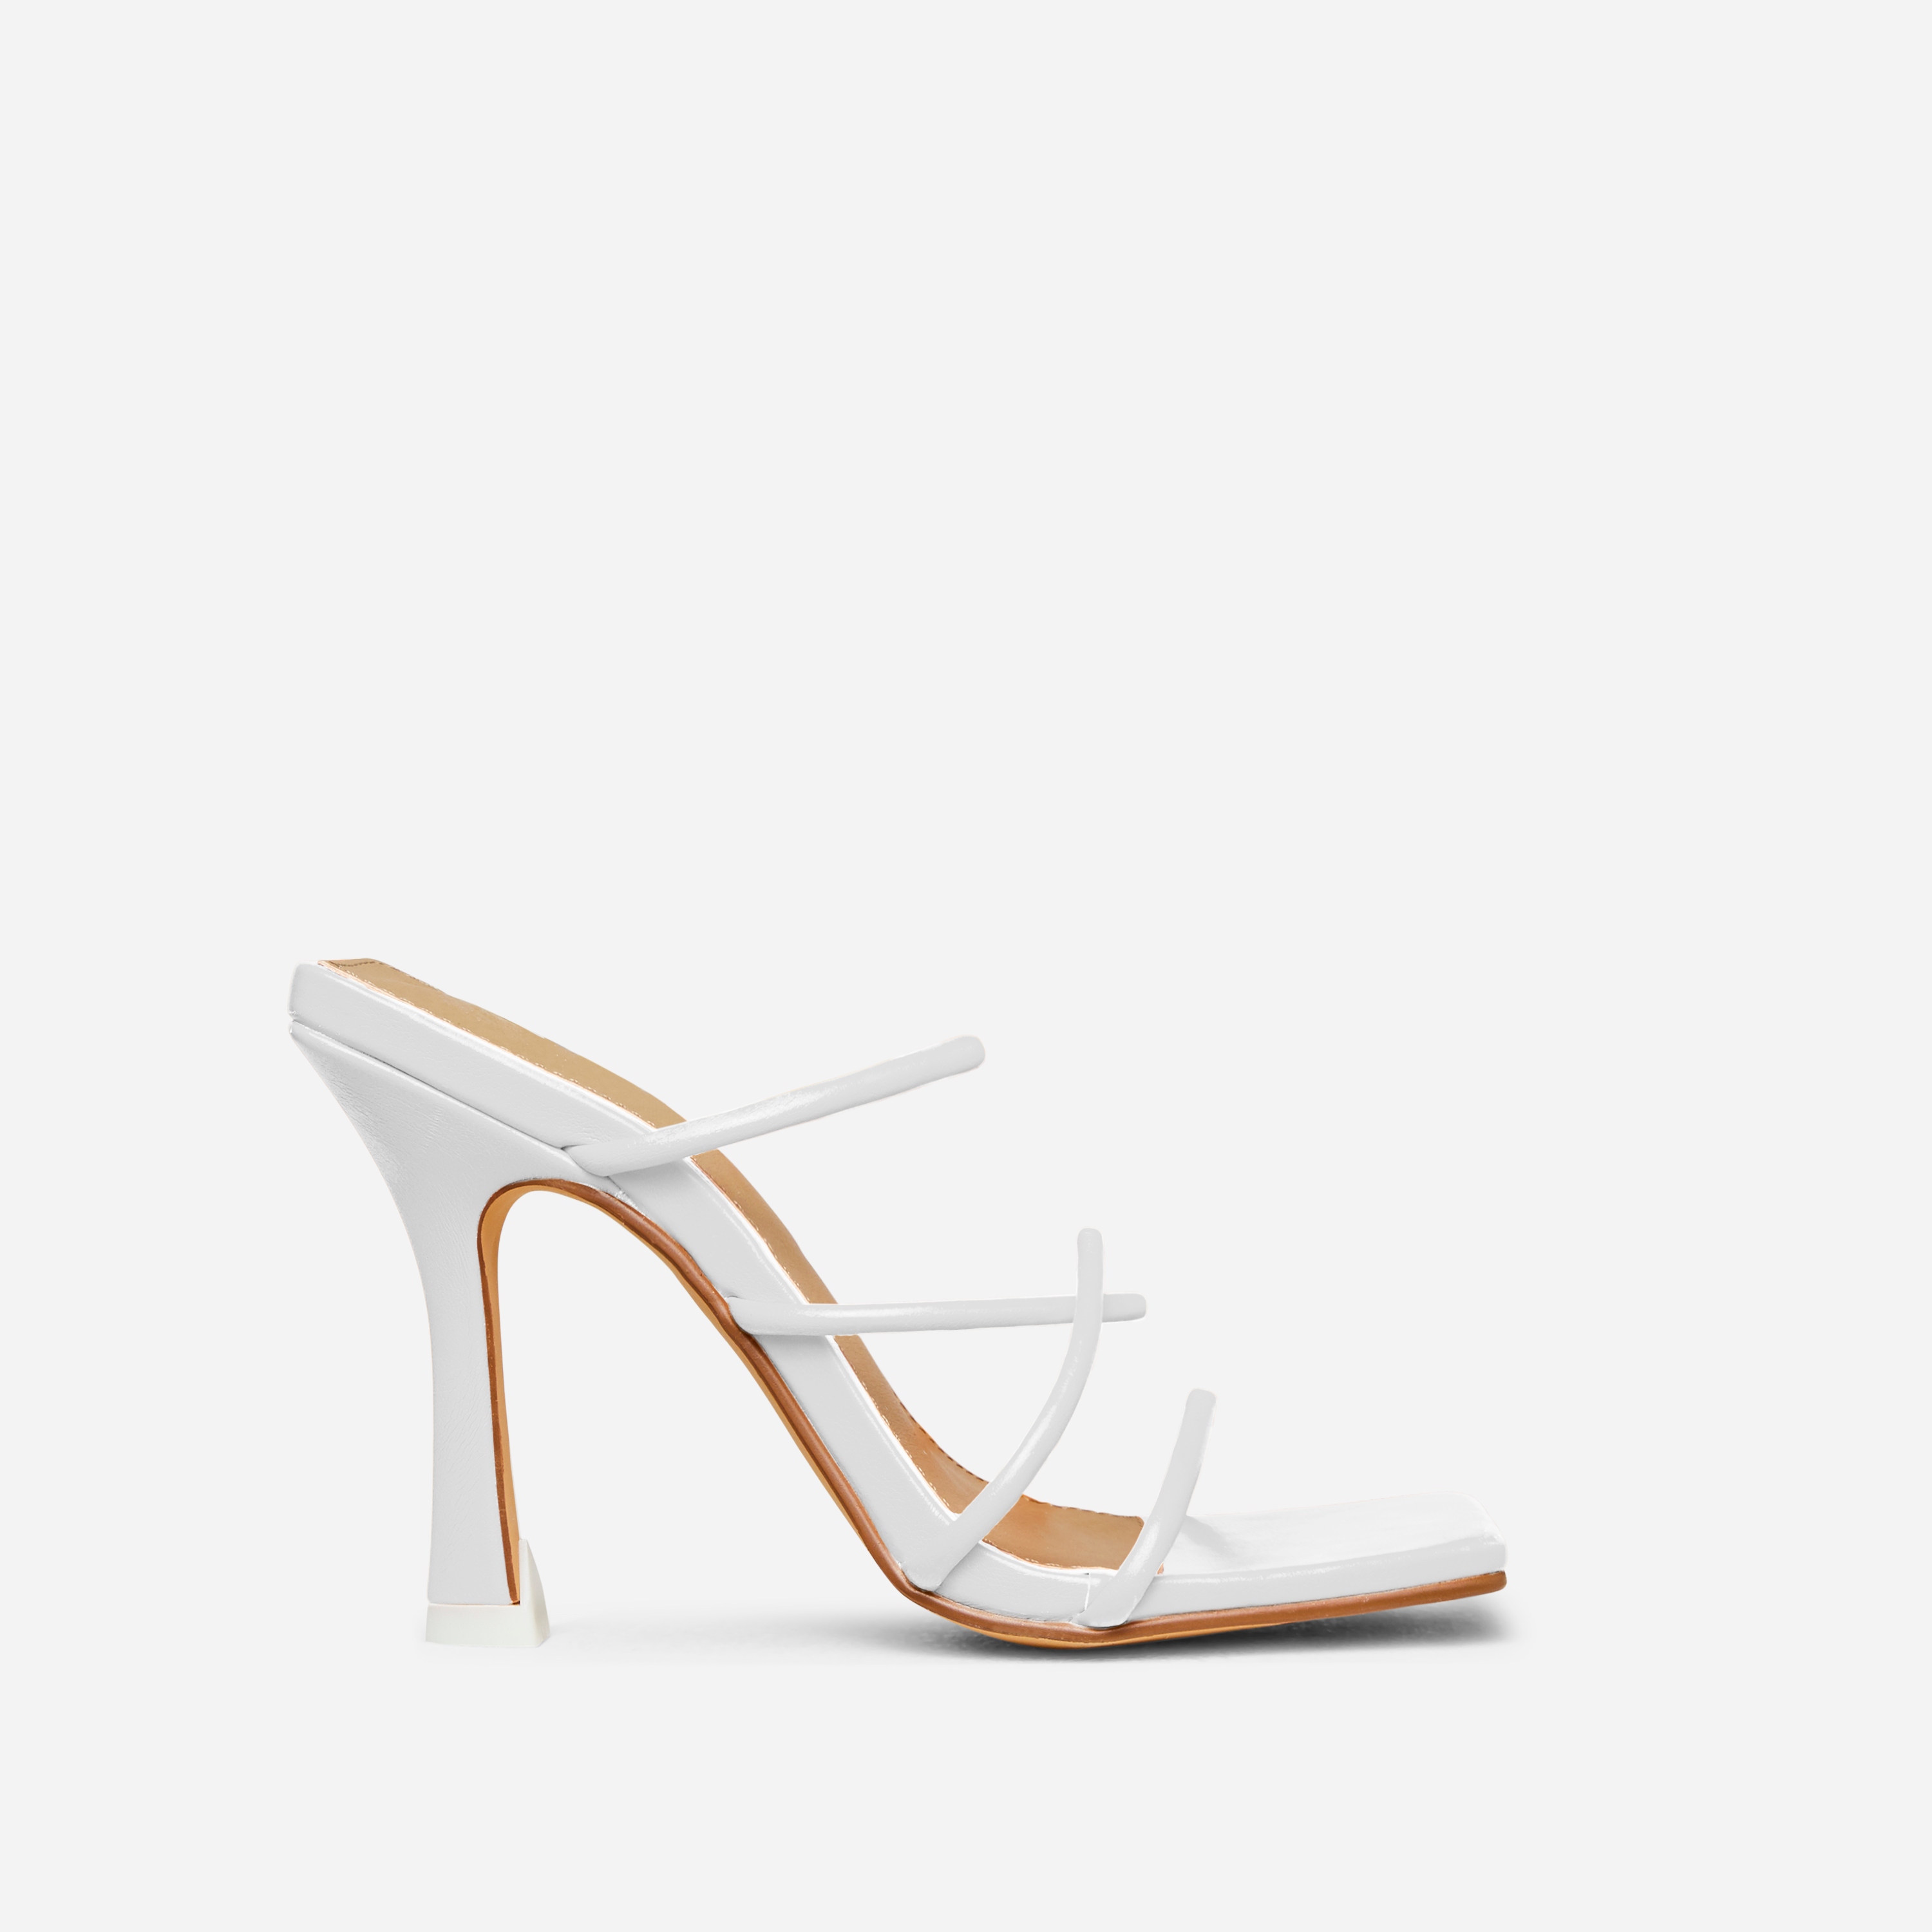 Blissy Twisted Strap Square Toe Heel Mule In White Faux Leather, White